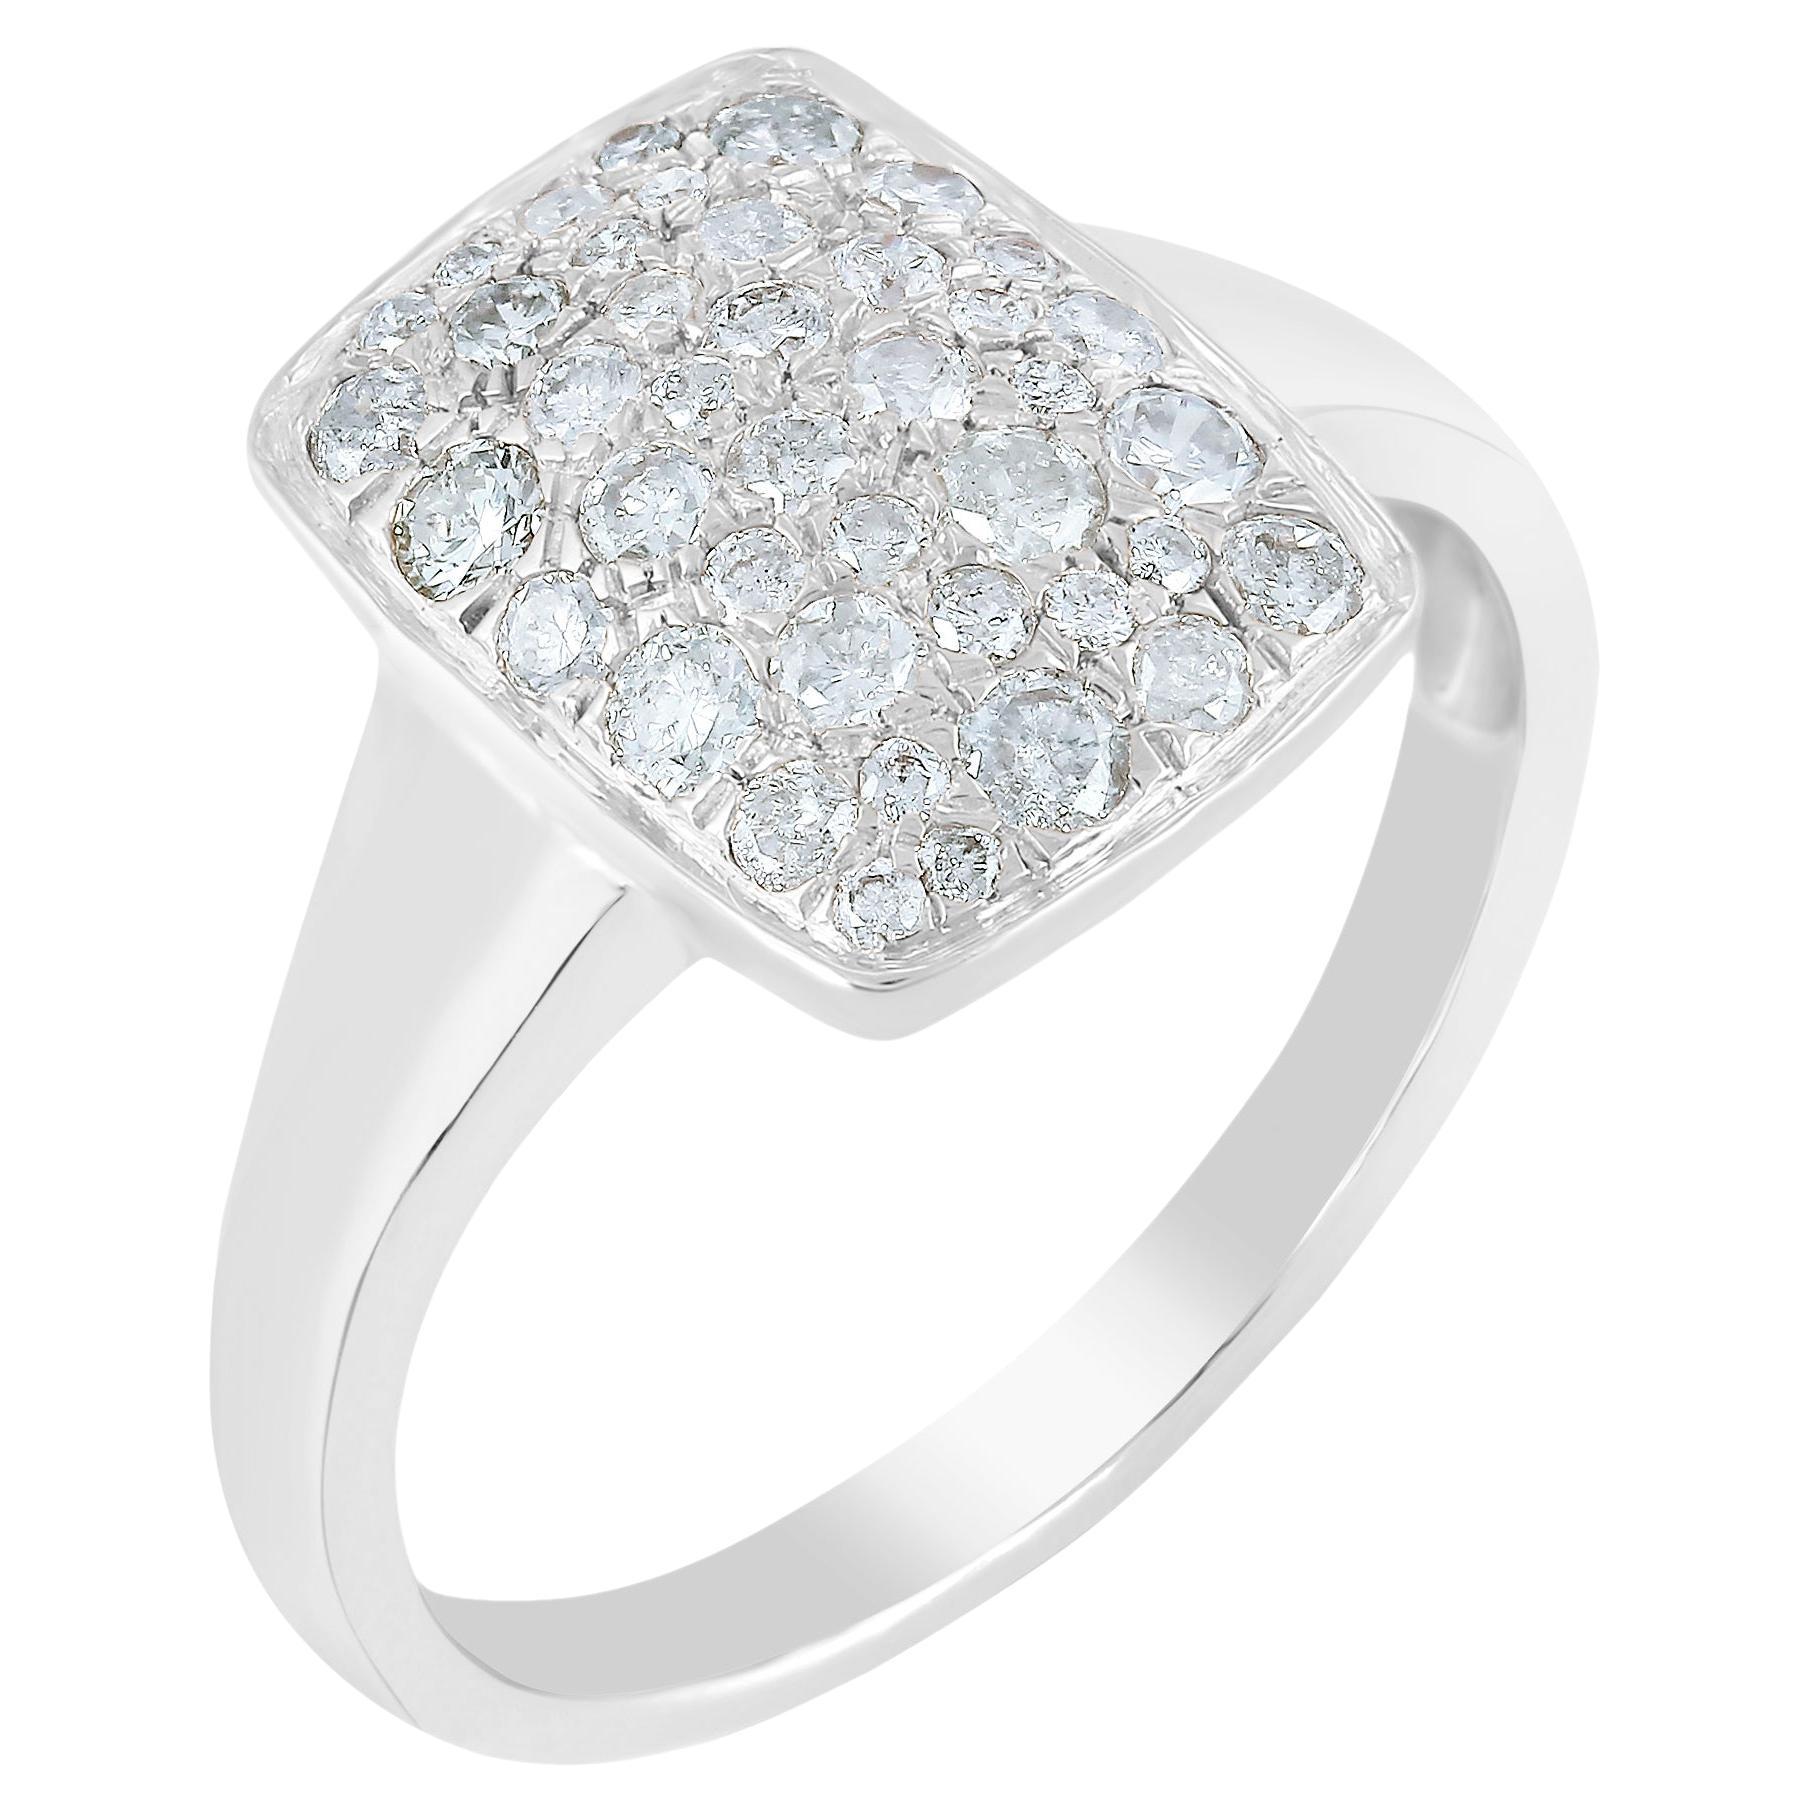 Gemistry 0.63cttw Diamond Cluster Ring in 925 Sterling Silver For Sale